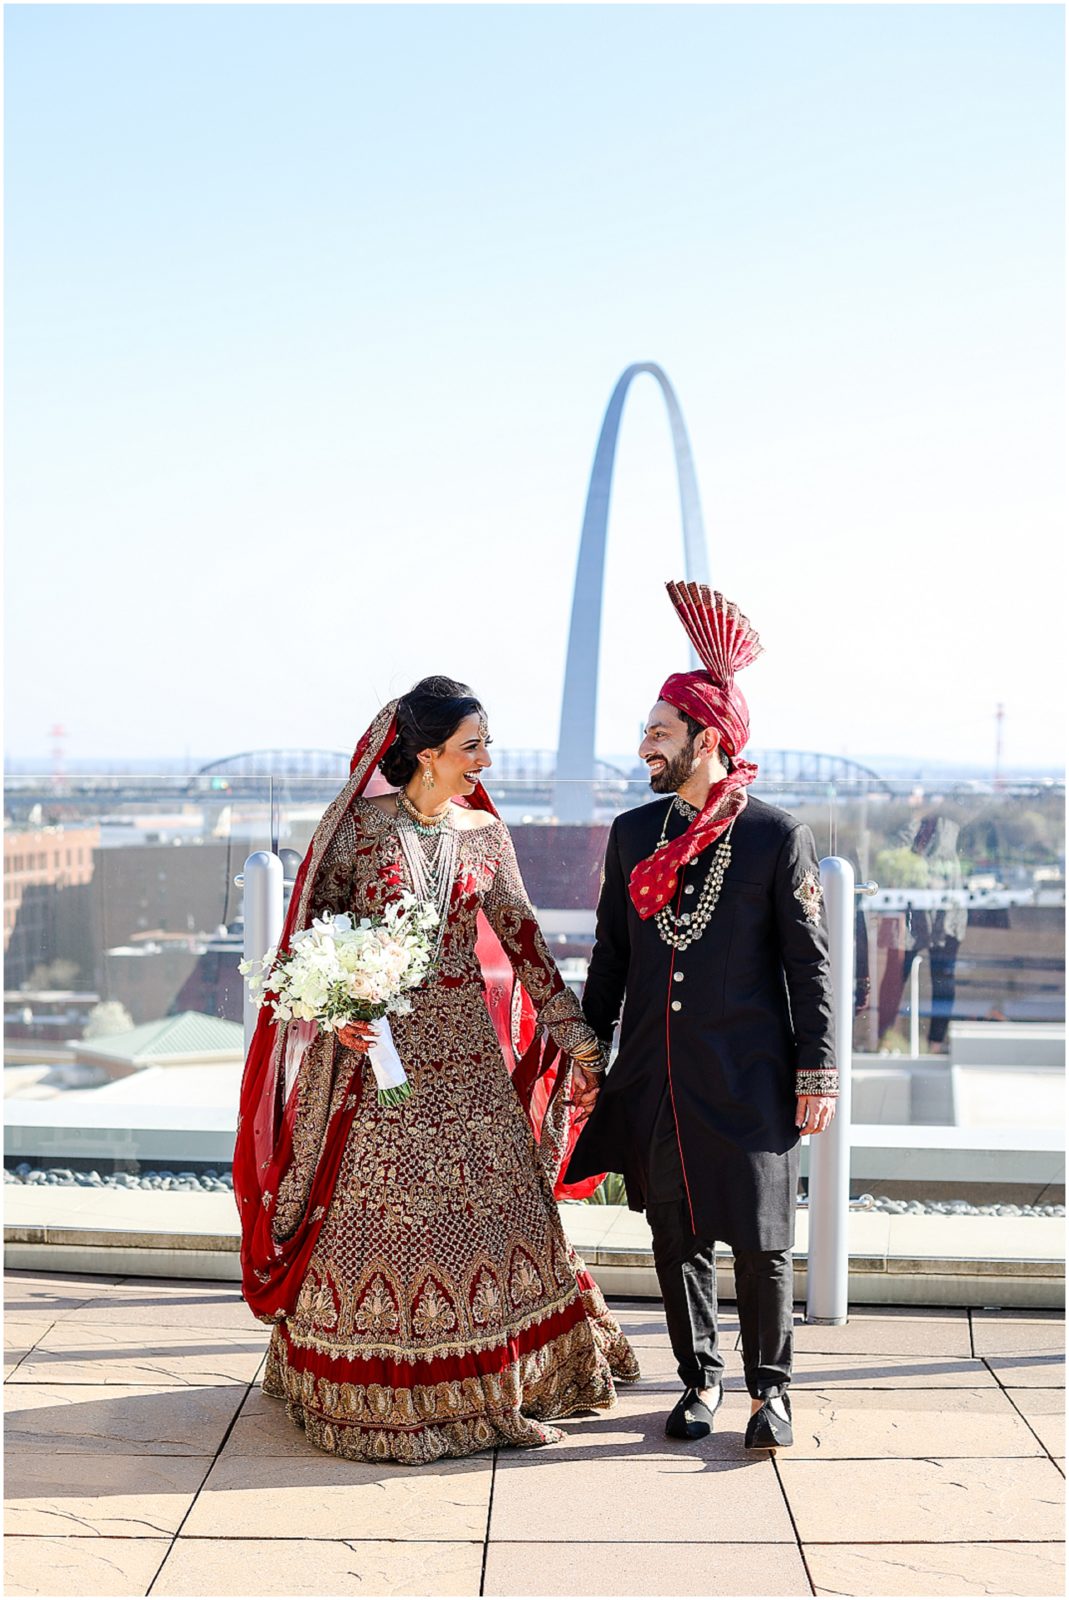 wedding photos with st. louis archway